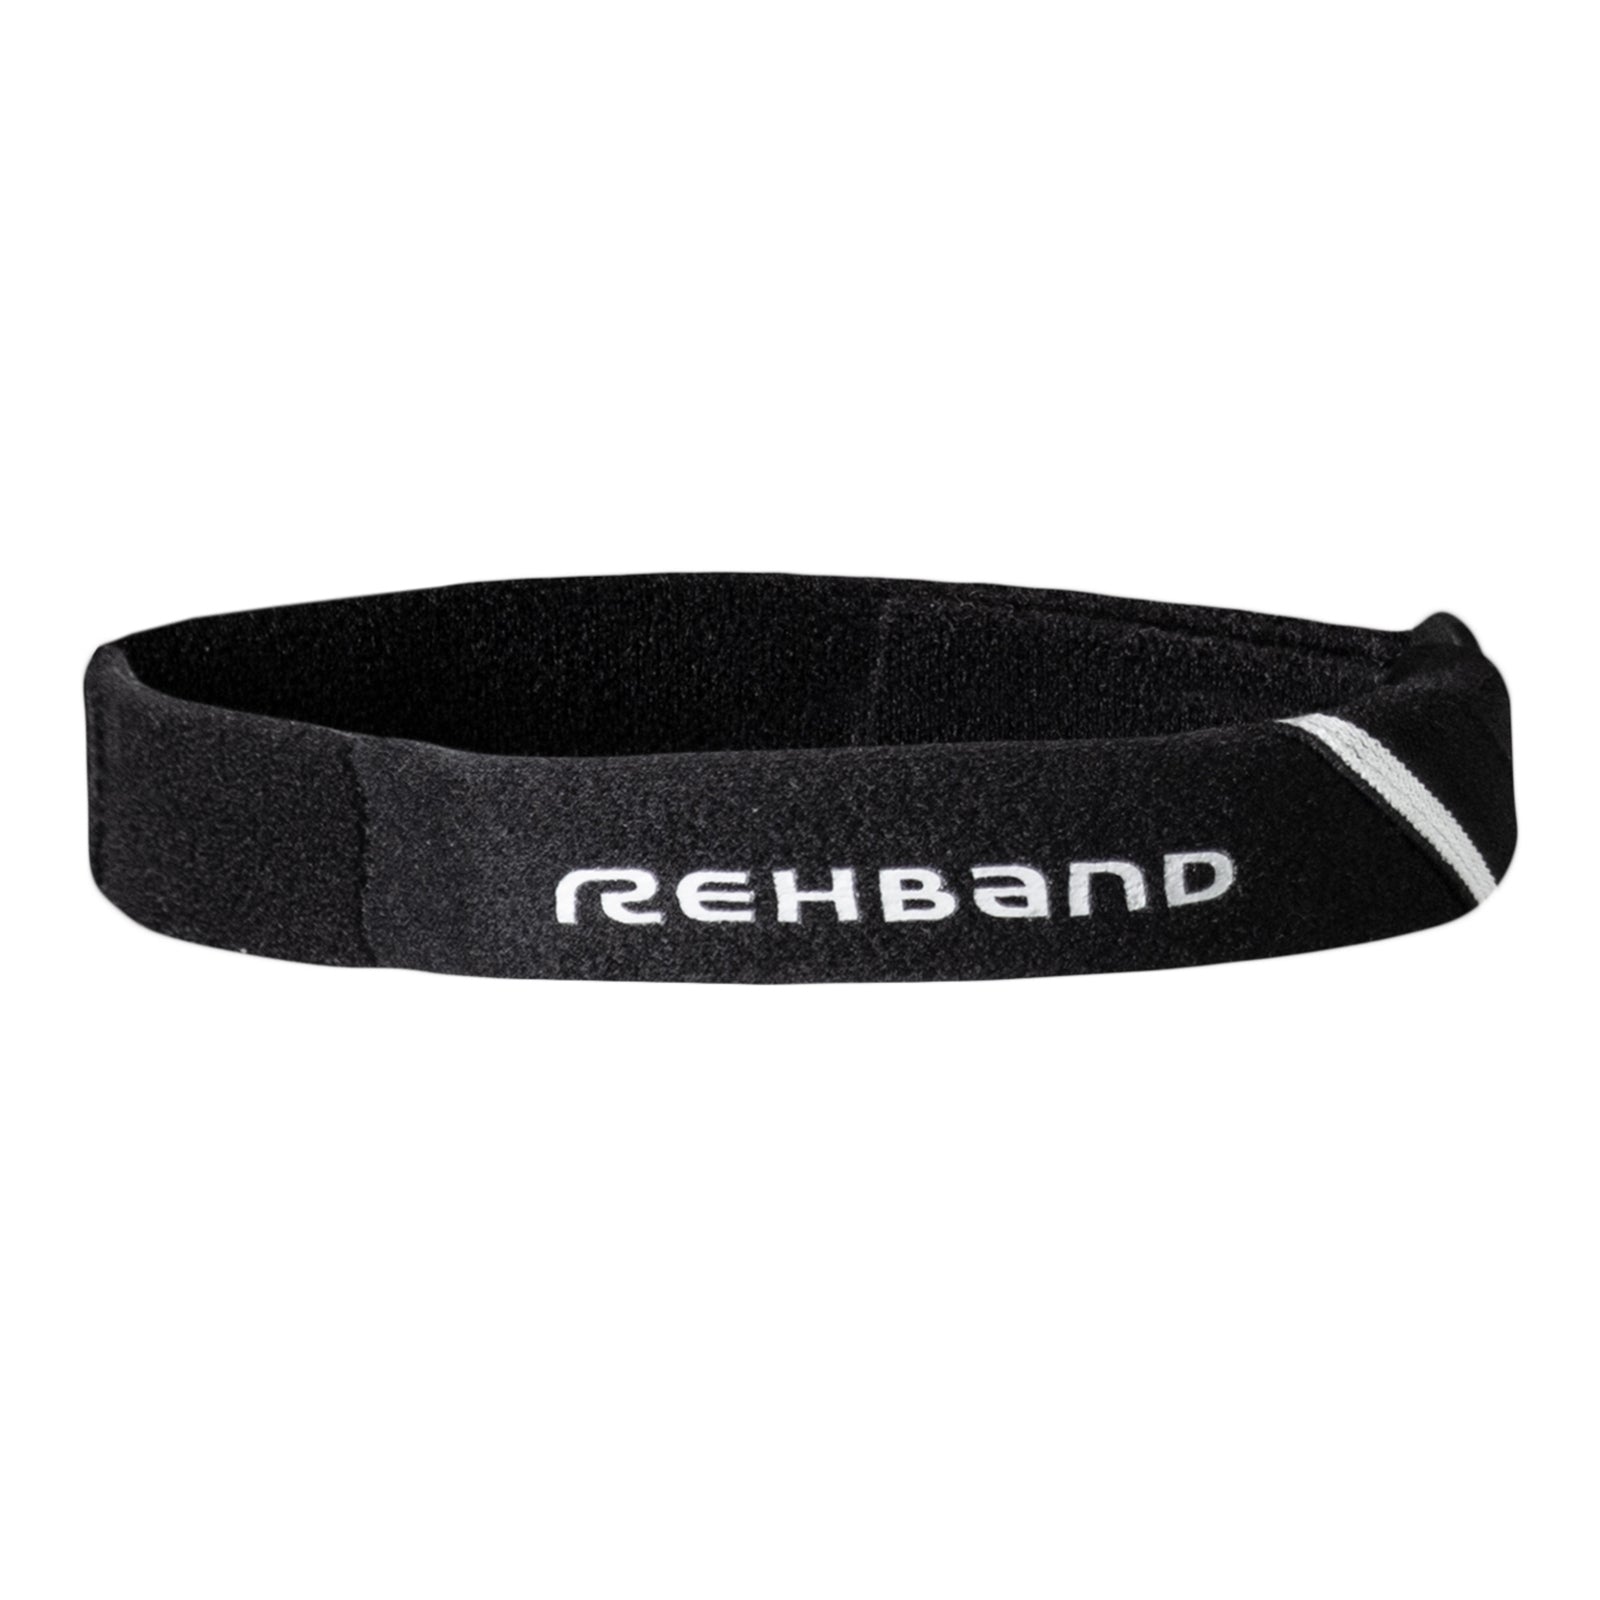 A black knee strap with a white Rehband lettering